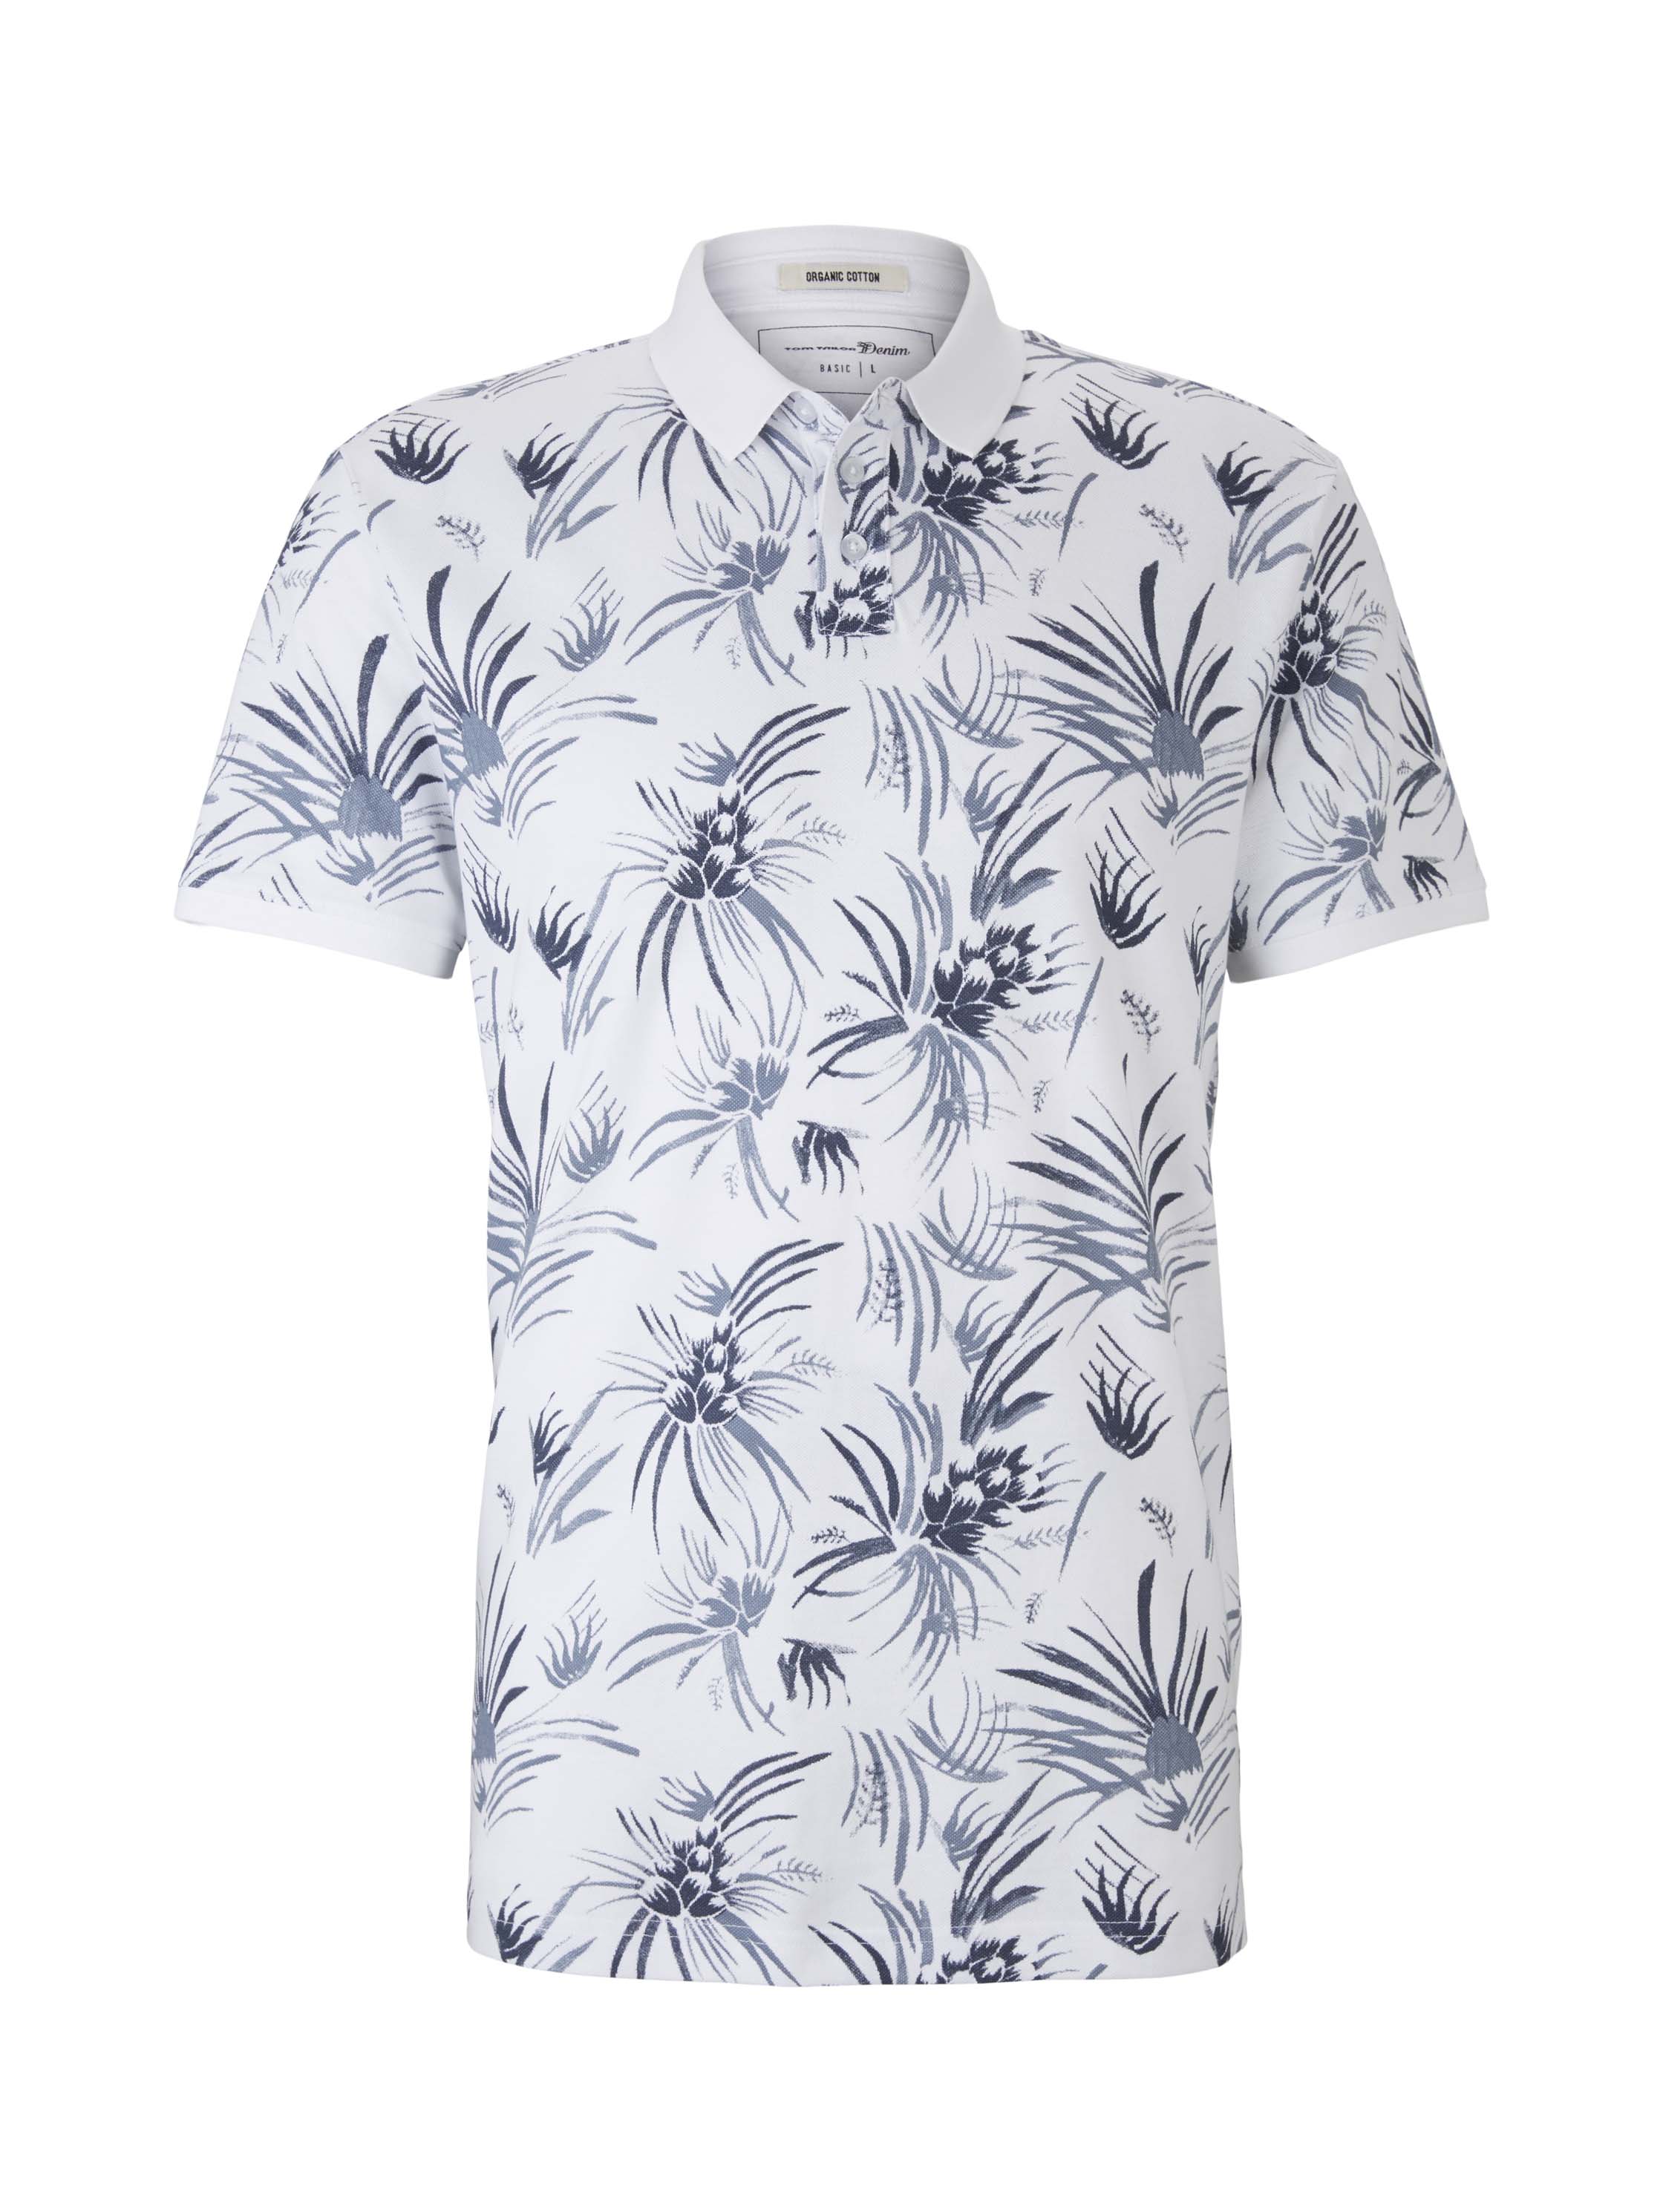 polo with all over print, white navy thistle print